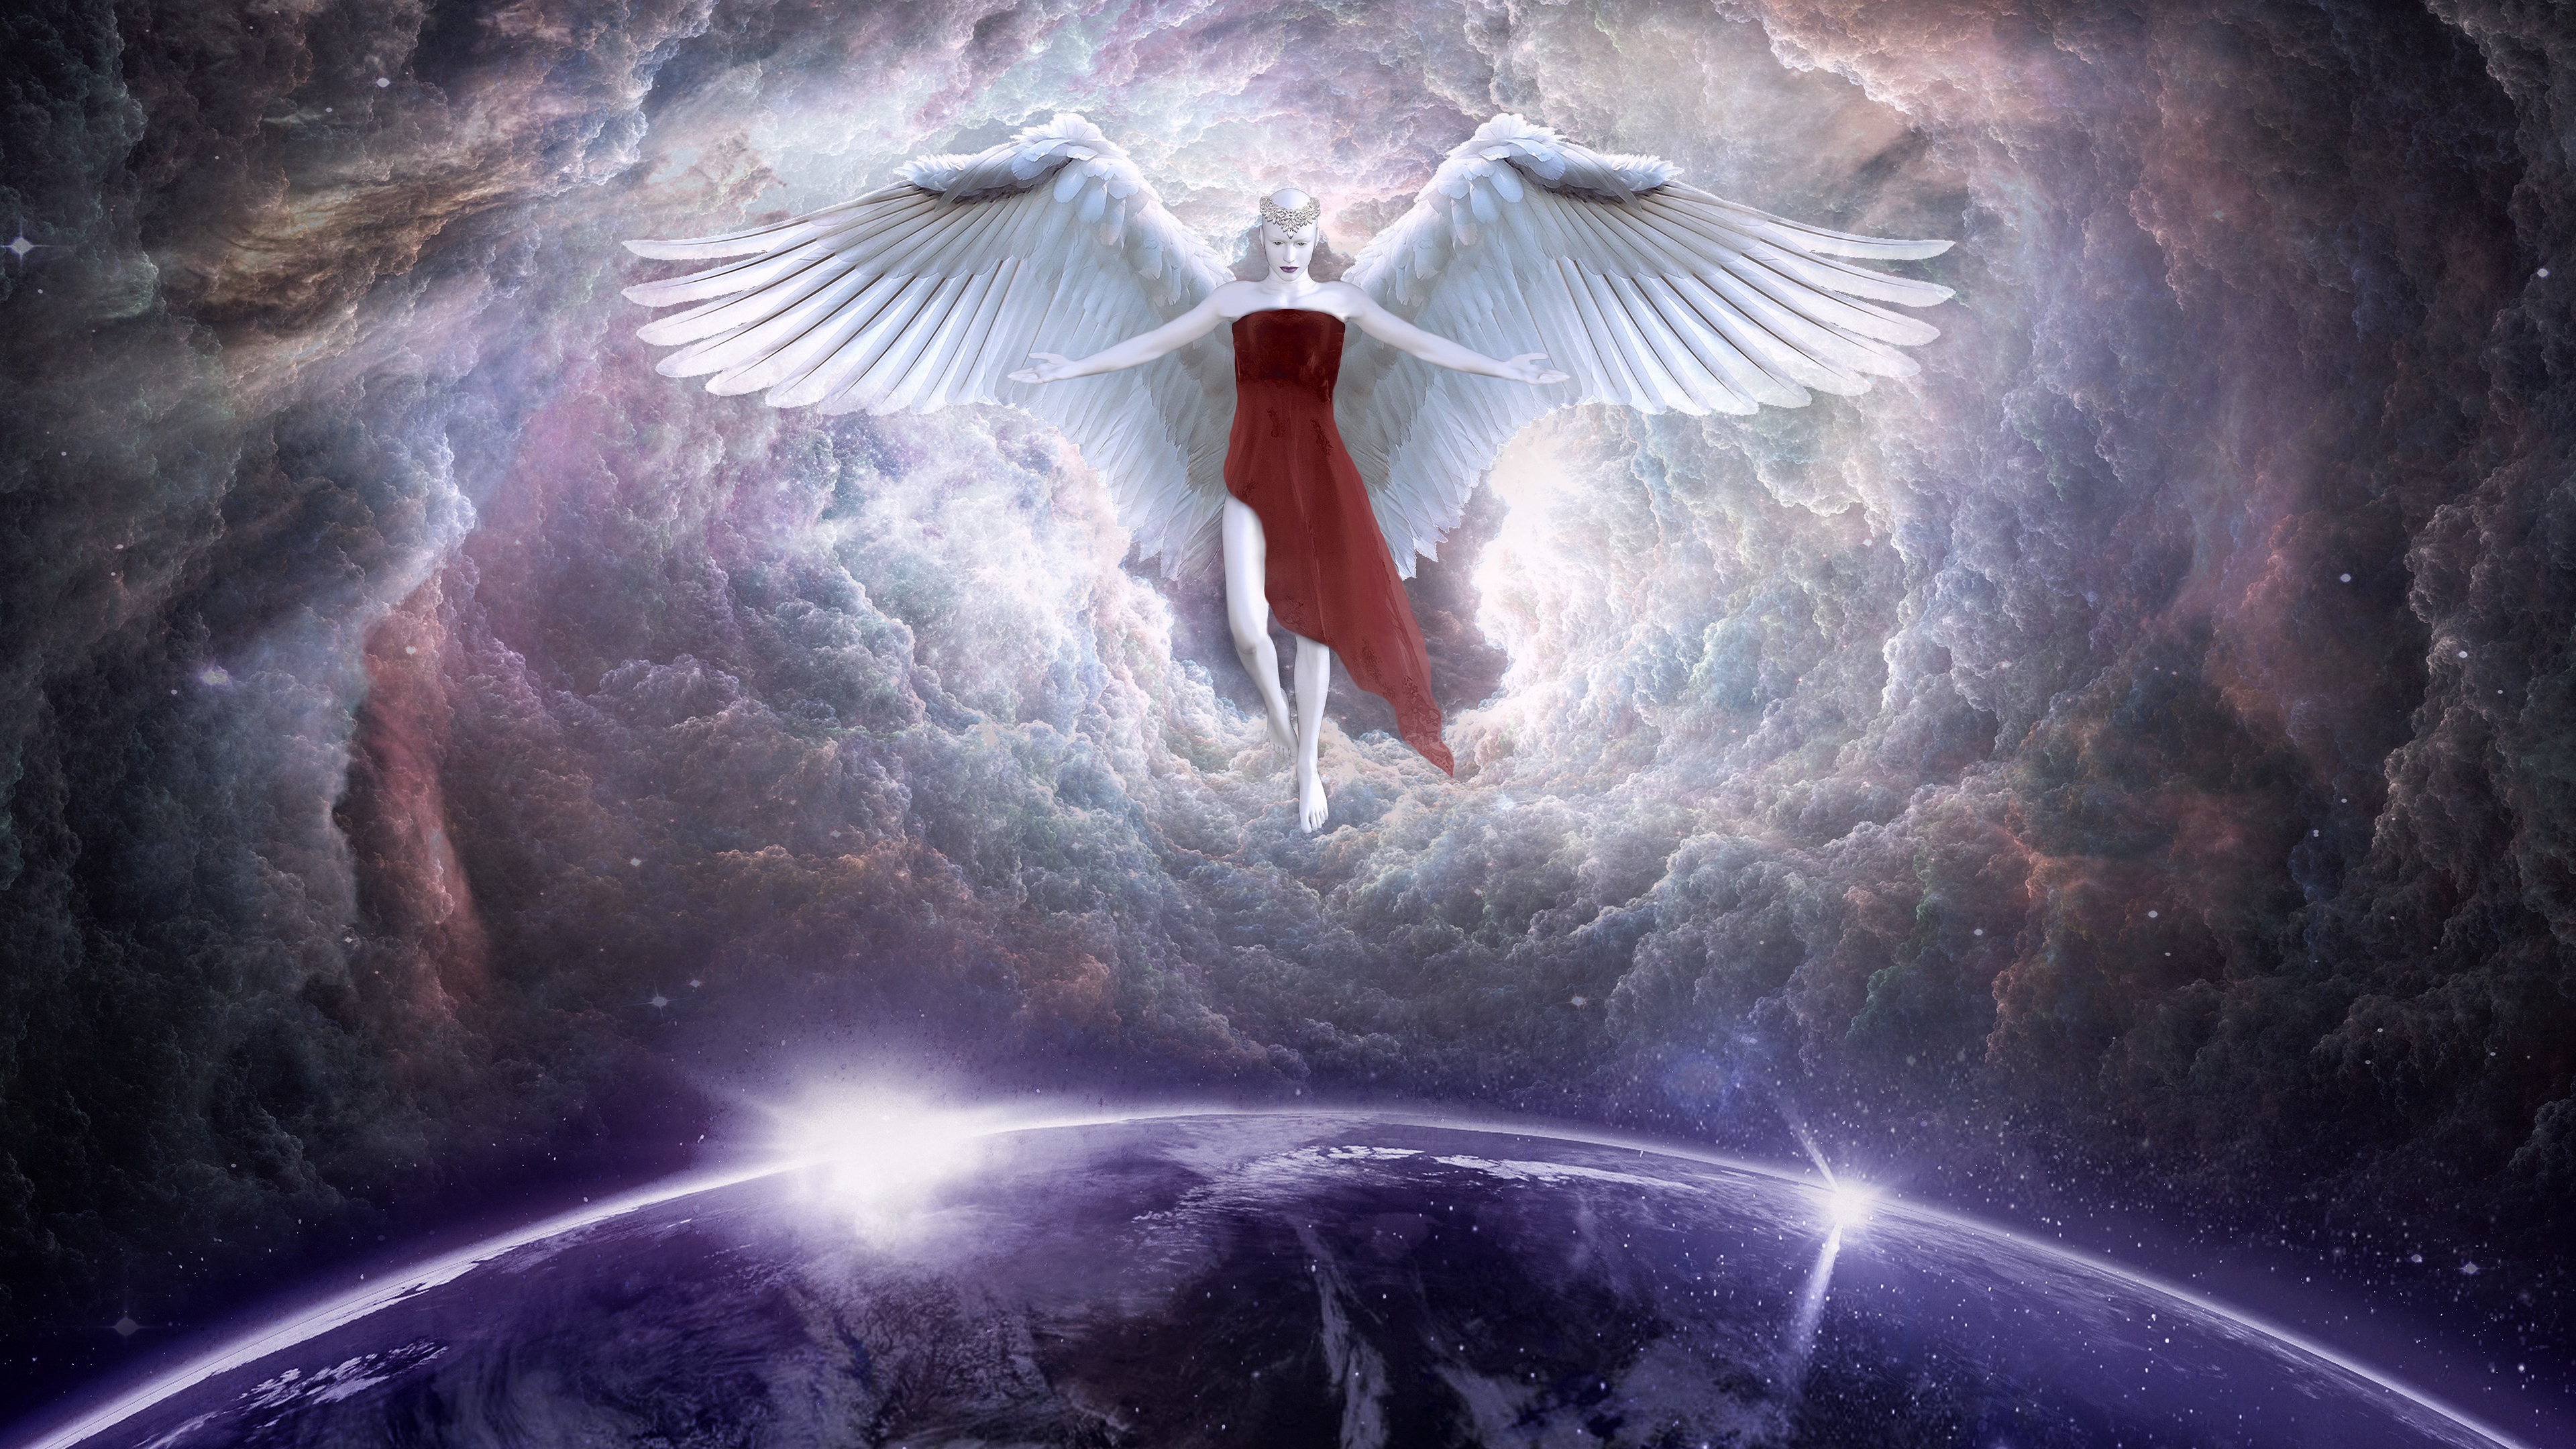 Angel Wings Background Images HD Pictures and Wallpaper For Free Download   Pngtree  Angel wings background Blue sky background Angel pictures